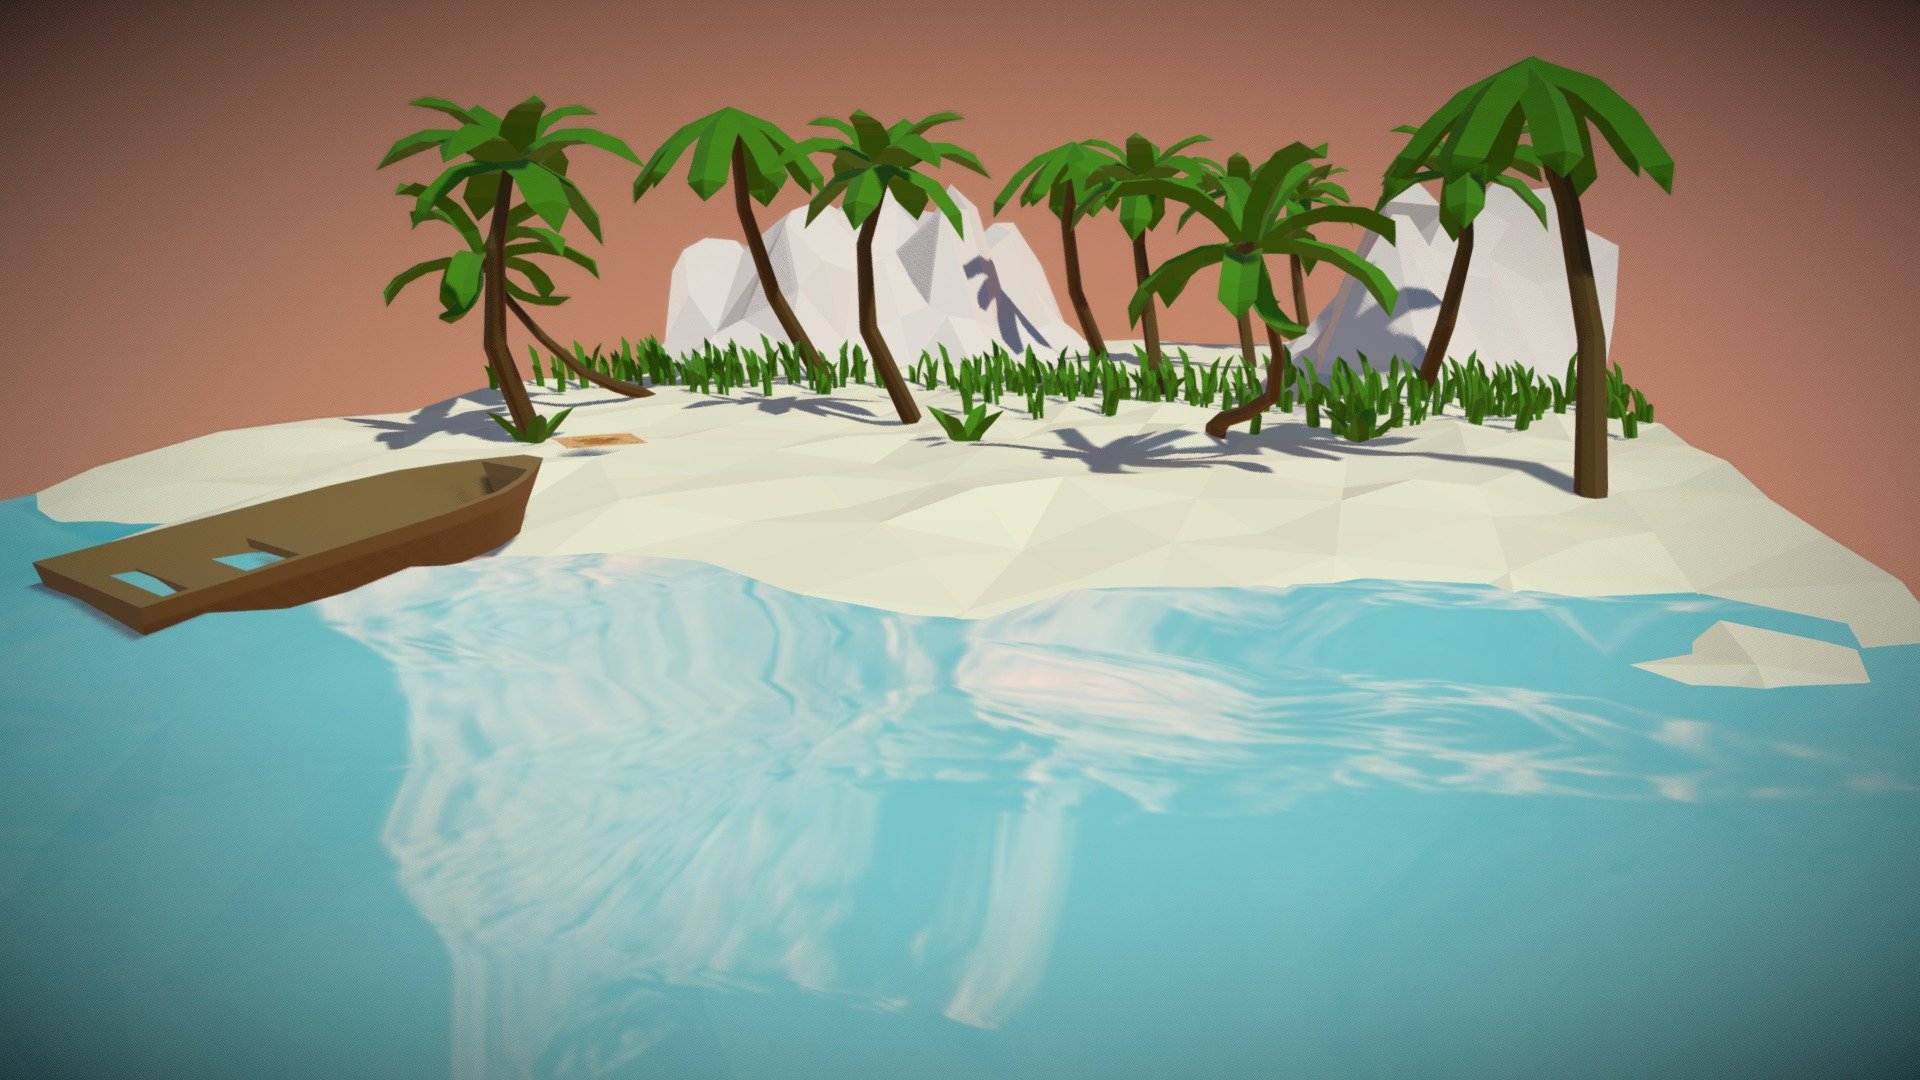 The Island Mystery VR (Part 1)